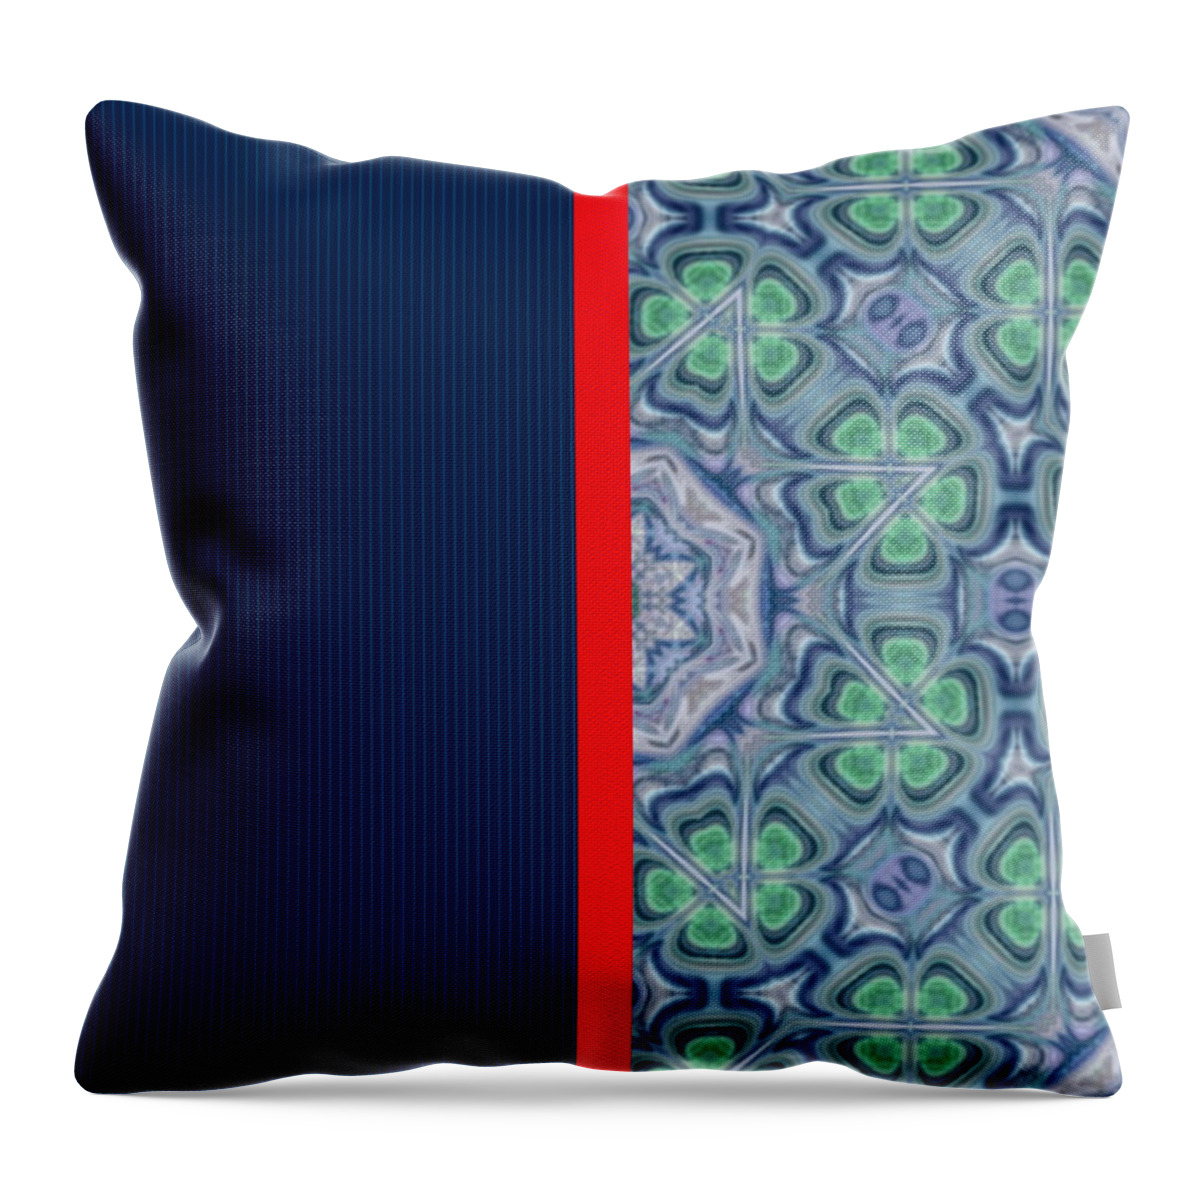 Blue Throw Pillow featuring the digital art Totally Telda by Designs By L